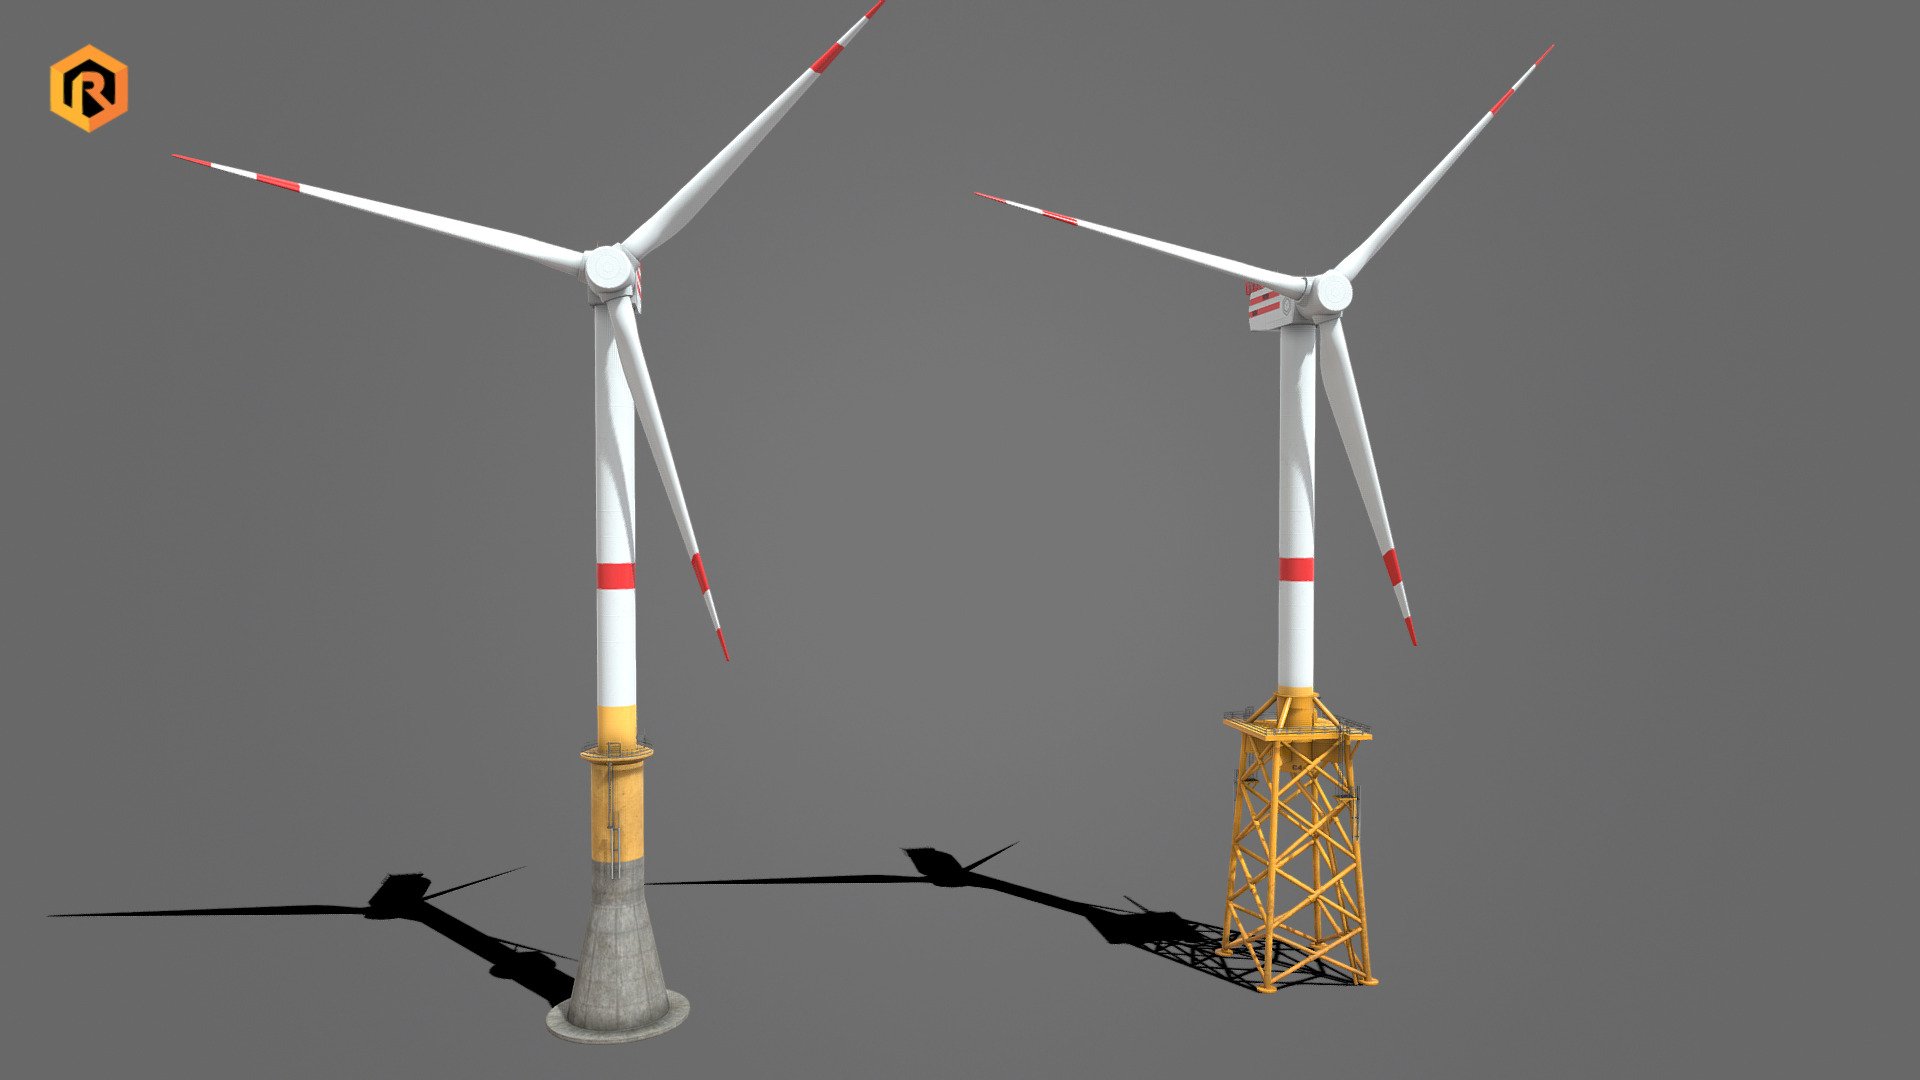 Mid-poly PBR 3D models of Offshore Wind Farm. There are 2 wind turbines in this assets package.

This object is best for use in games and other VR / AR, real-time applications such as Unity or Unreal Engine.  It can also be rendered in Blender (ex Cycles) or Vray as the model is equipped with detailed textures.  

Technical details:




3 shared PBR textures sets (Main Turbine, Base Turbine, and Turbine Alpha)

Wind Turbine 1- 11570 Triangles

Wind Turbine 2 - 15680 Triangles

The model is divided into few 2 objects (Main body and doors)

Model completely unwrapped.

Model is fully textured with all materials applied.

Pivot points are correctly placed to suit animation process.

Lot of additional file formats included (Blender, Unity, Maya etc.)

More file formats are available in additional zip file on product page.

Please feel free to contact me if you have any questions or need any support for this asset.

Support e-mail: support@rescue3d.com - Wind Turbines - Buy Royalty Free 3D model by Rescue3D Assets (@rescue3d) 3d model